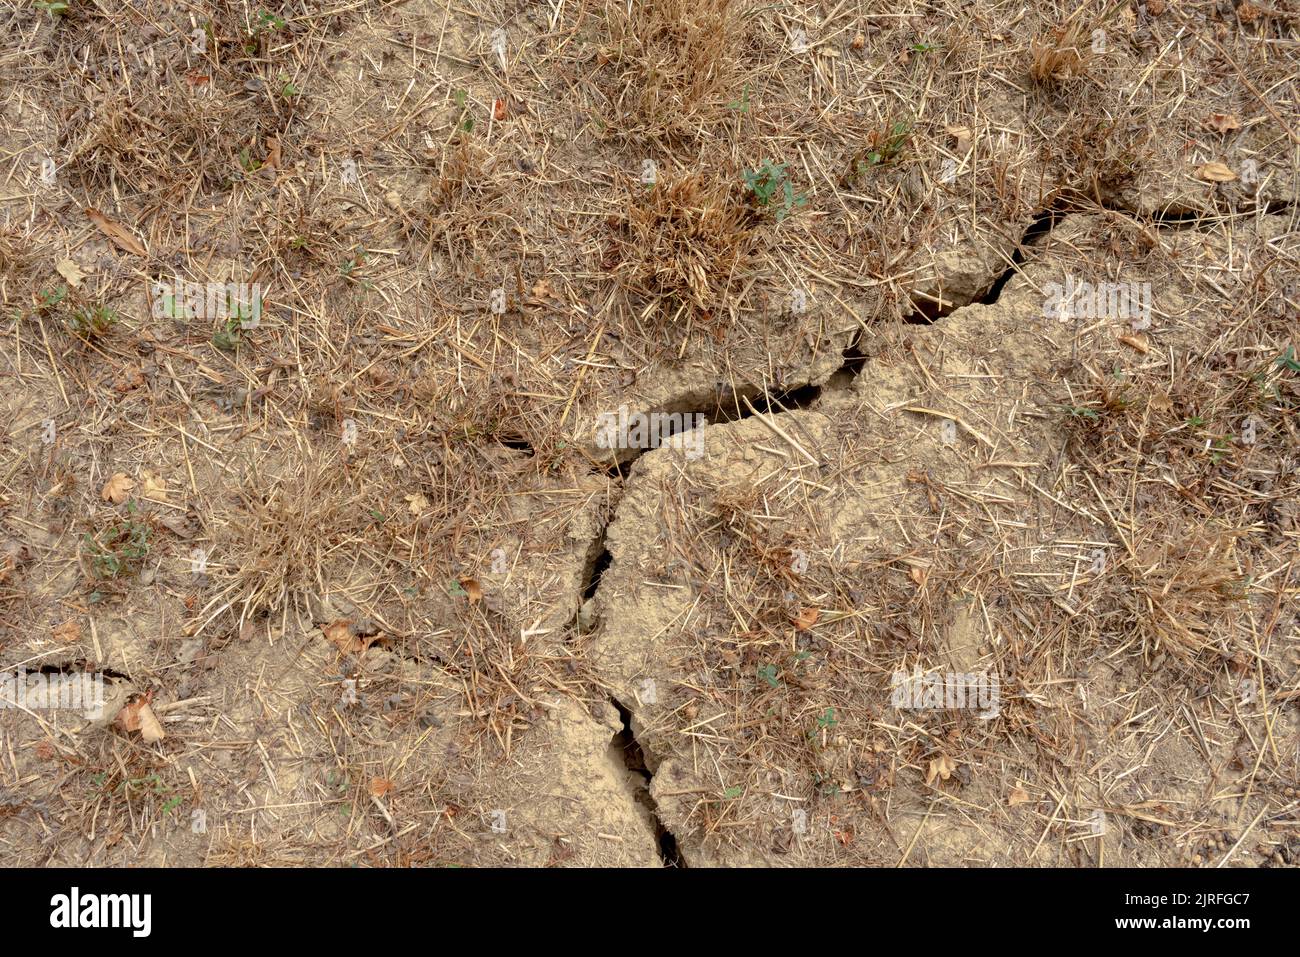 High angle shot showing a cleft on dried out ground Stock Photo